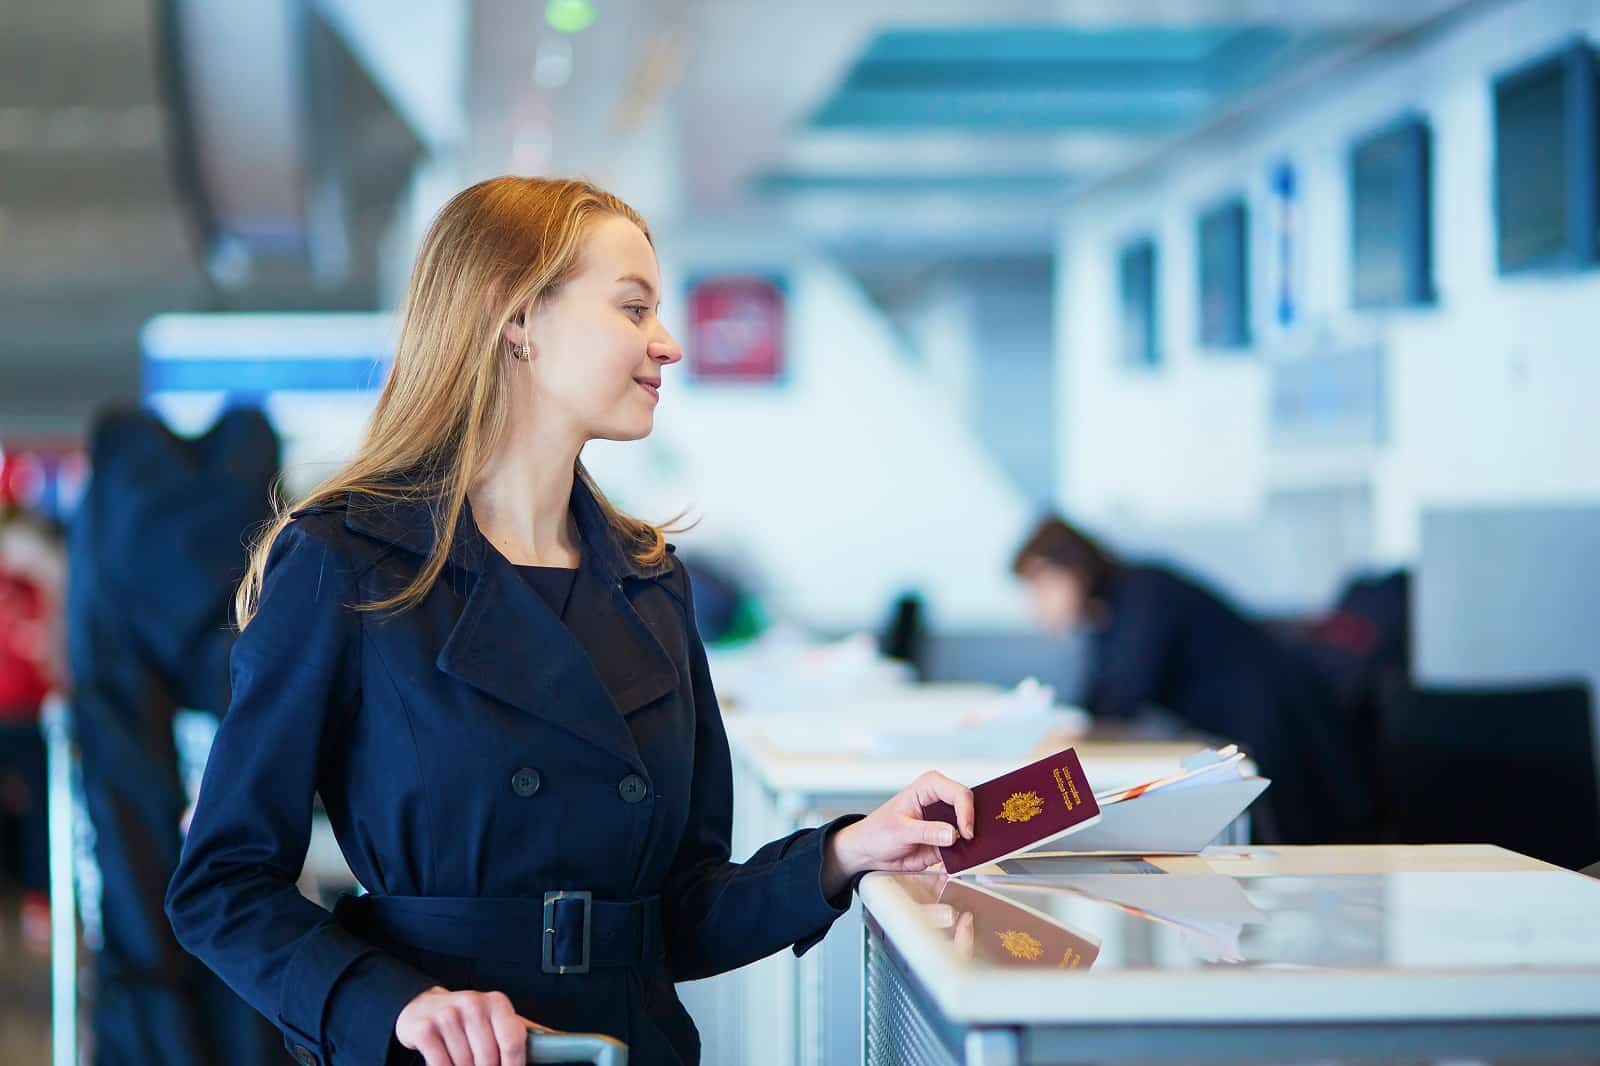 <p><span>Enroll in TSA PreCheck or Global Entry to breeze through the airport for expedited security checks. Download your airline’s app for real-time updates and digital boarding passes. Familiarize yourself with the airport layout to quickly locate lounges, gates, and amenities.</span></p> <p><b>Insider’s Tip: </b><span>Use apps like LoungeBuddy to access airport lounges for a more relaxed wait, even if you’re not flying first class.</span></p>